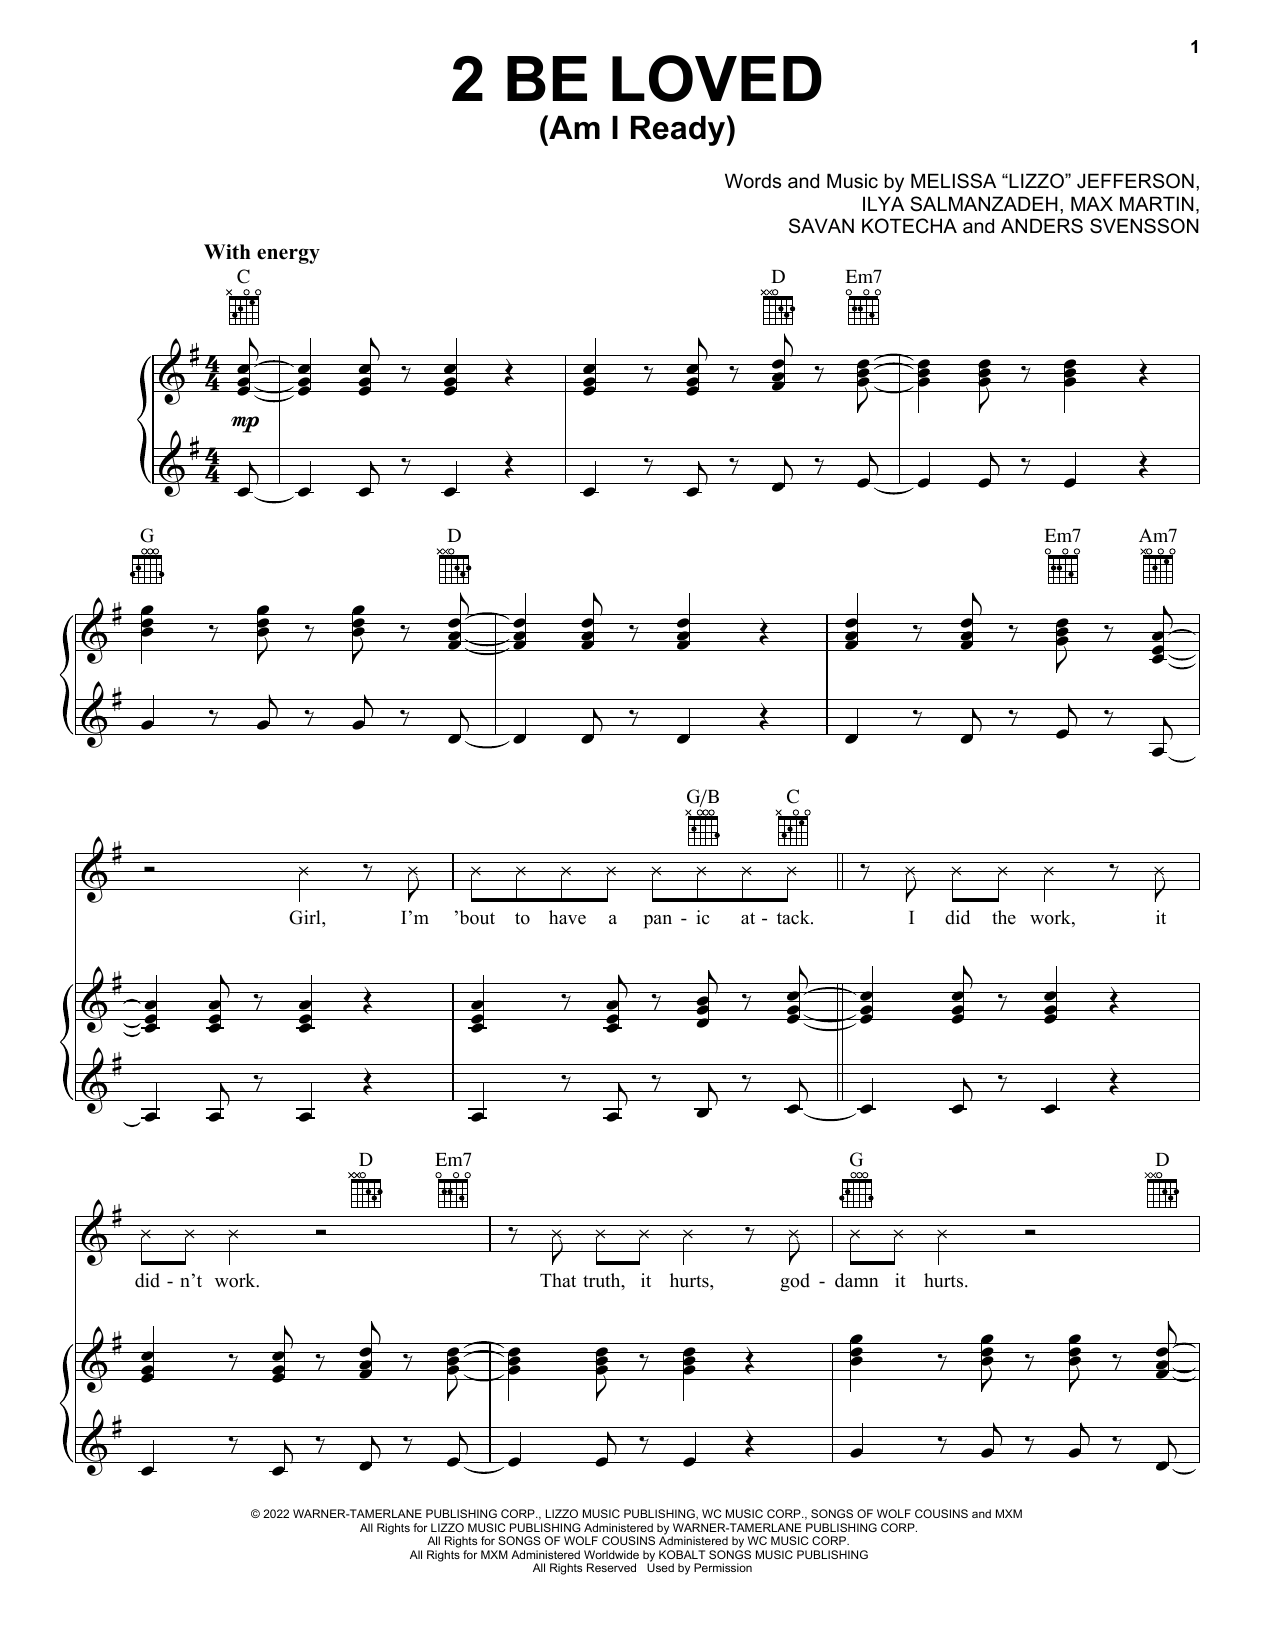 Download Lizzo 2 Be Loved (Am I Ready) Sheet Music